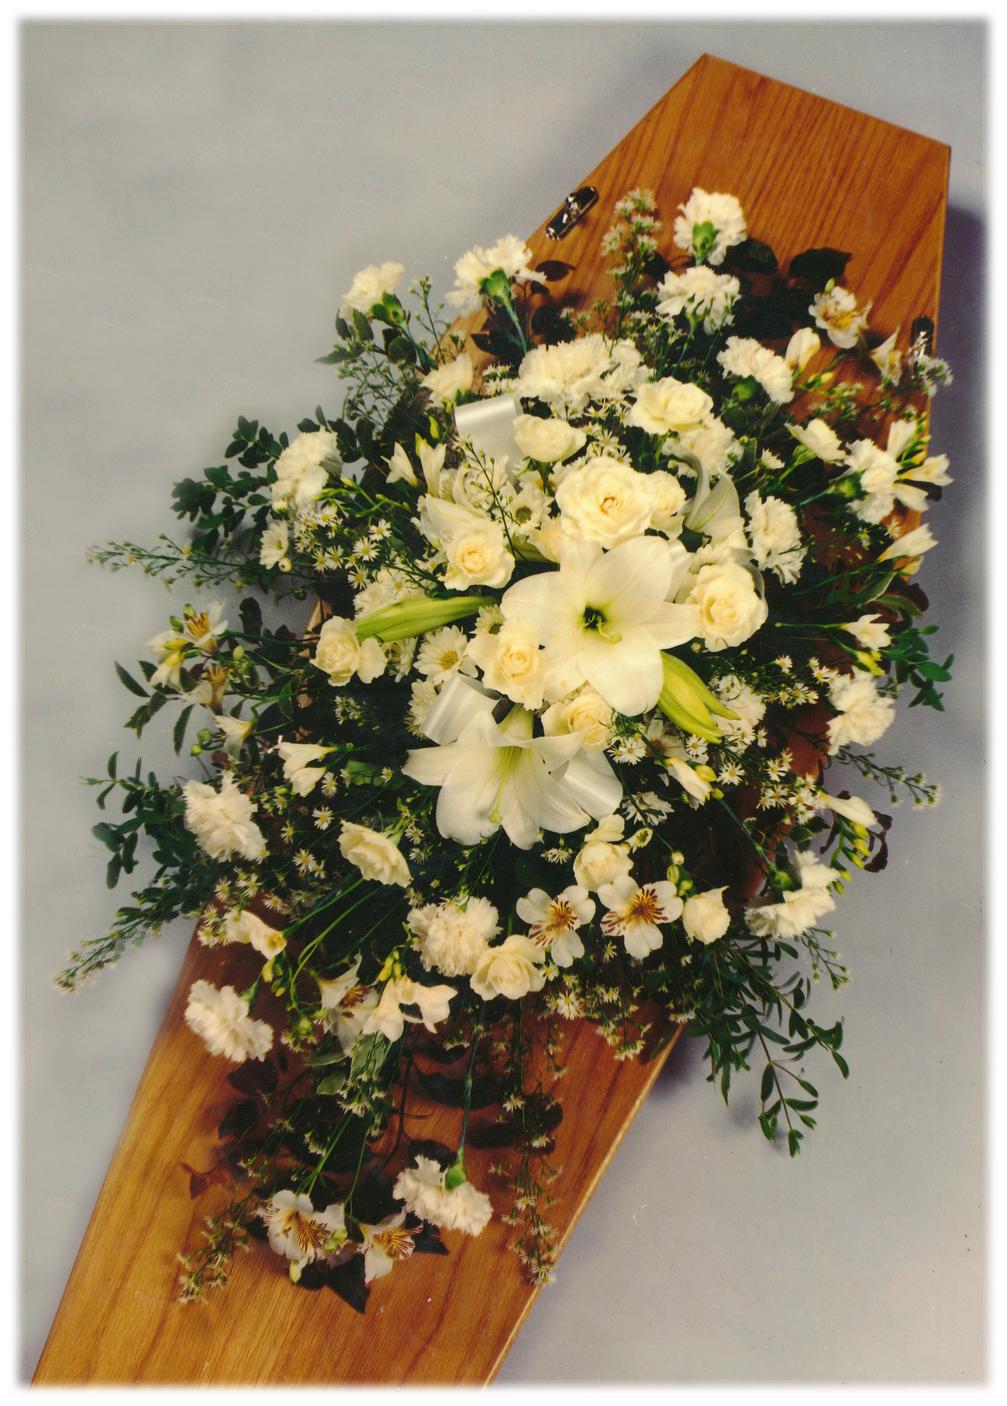 Floral Tributes | Funeral Directors in Portsmouth and Havant gallery image 1